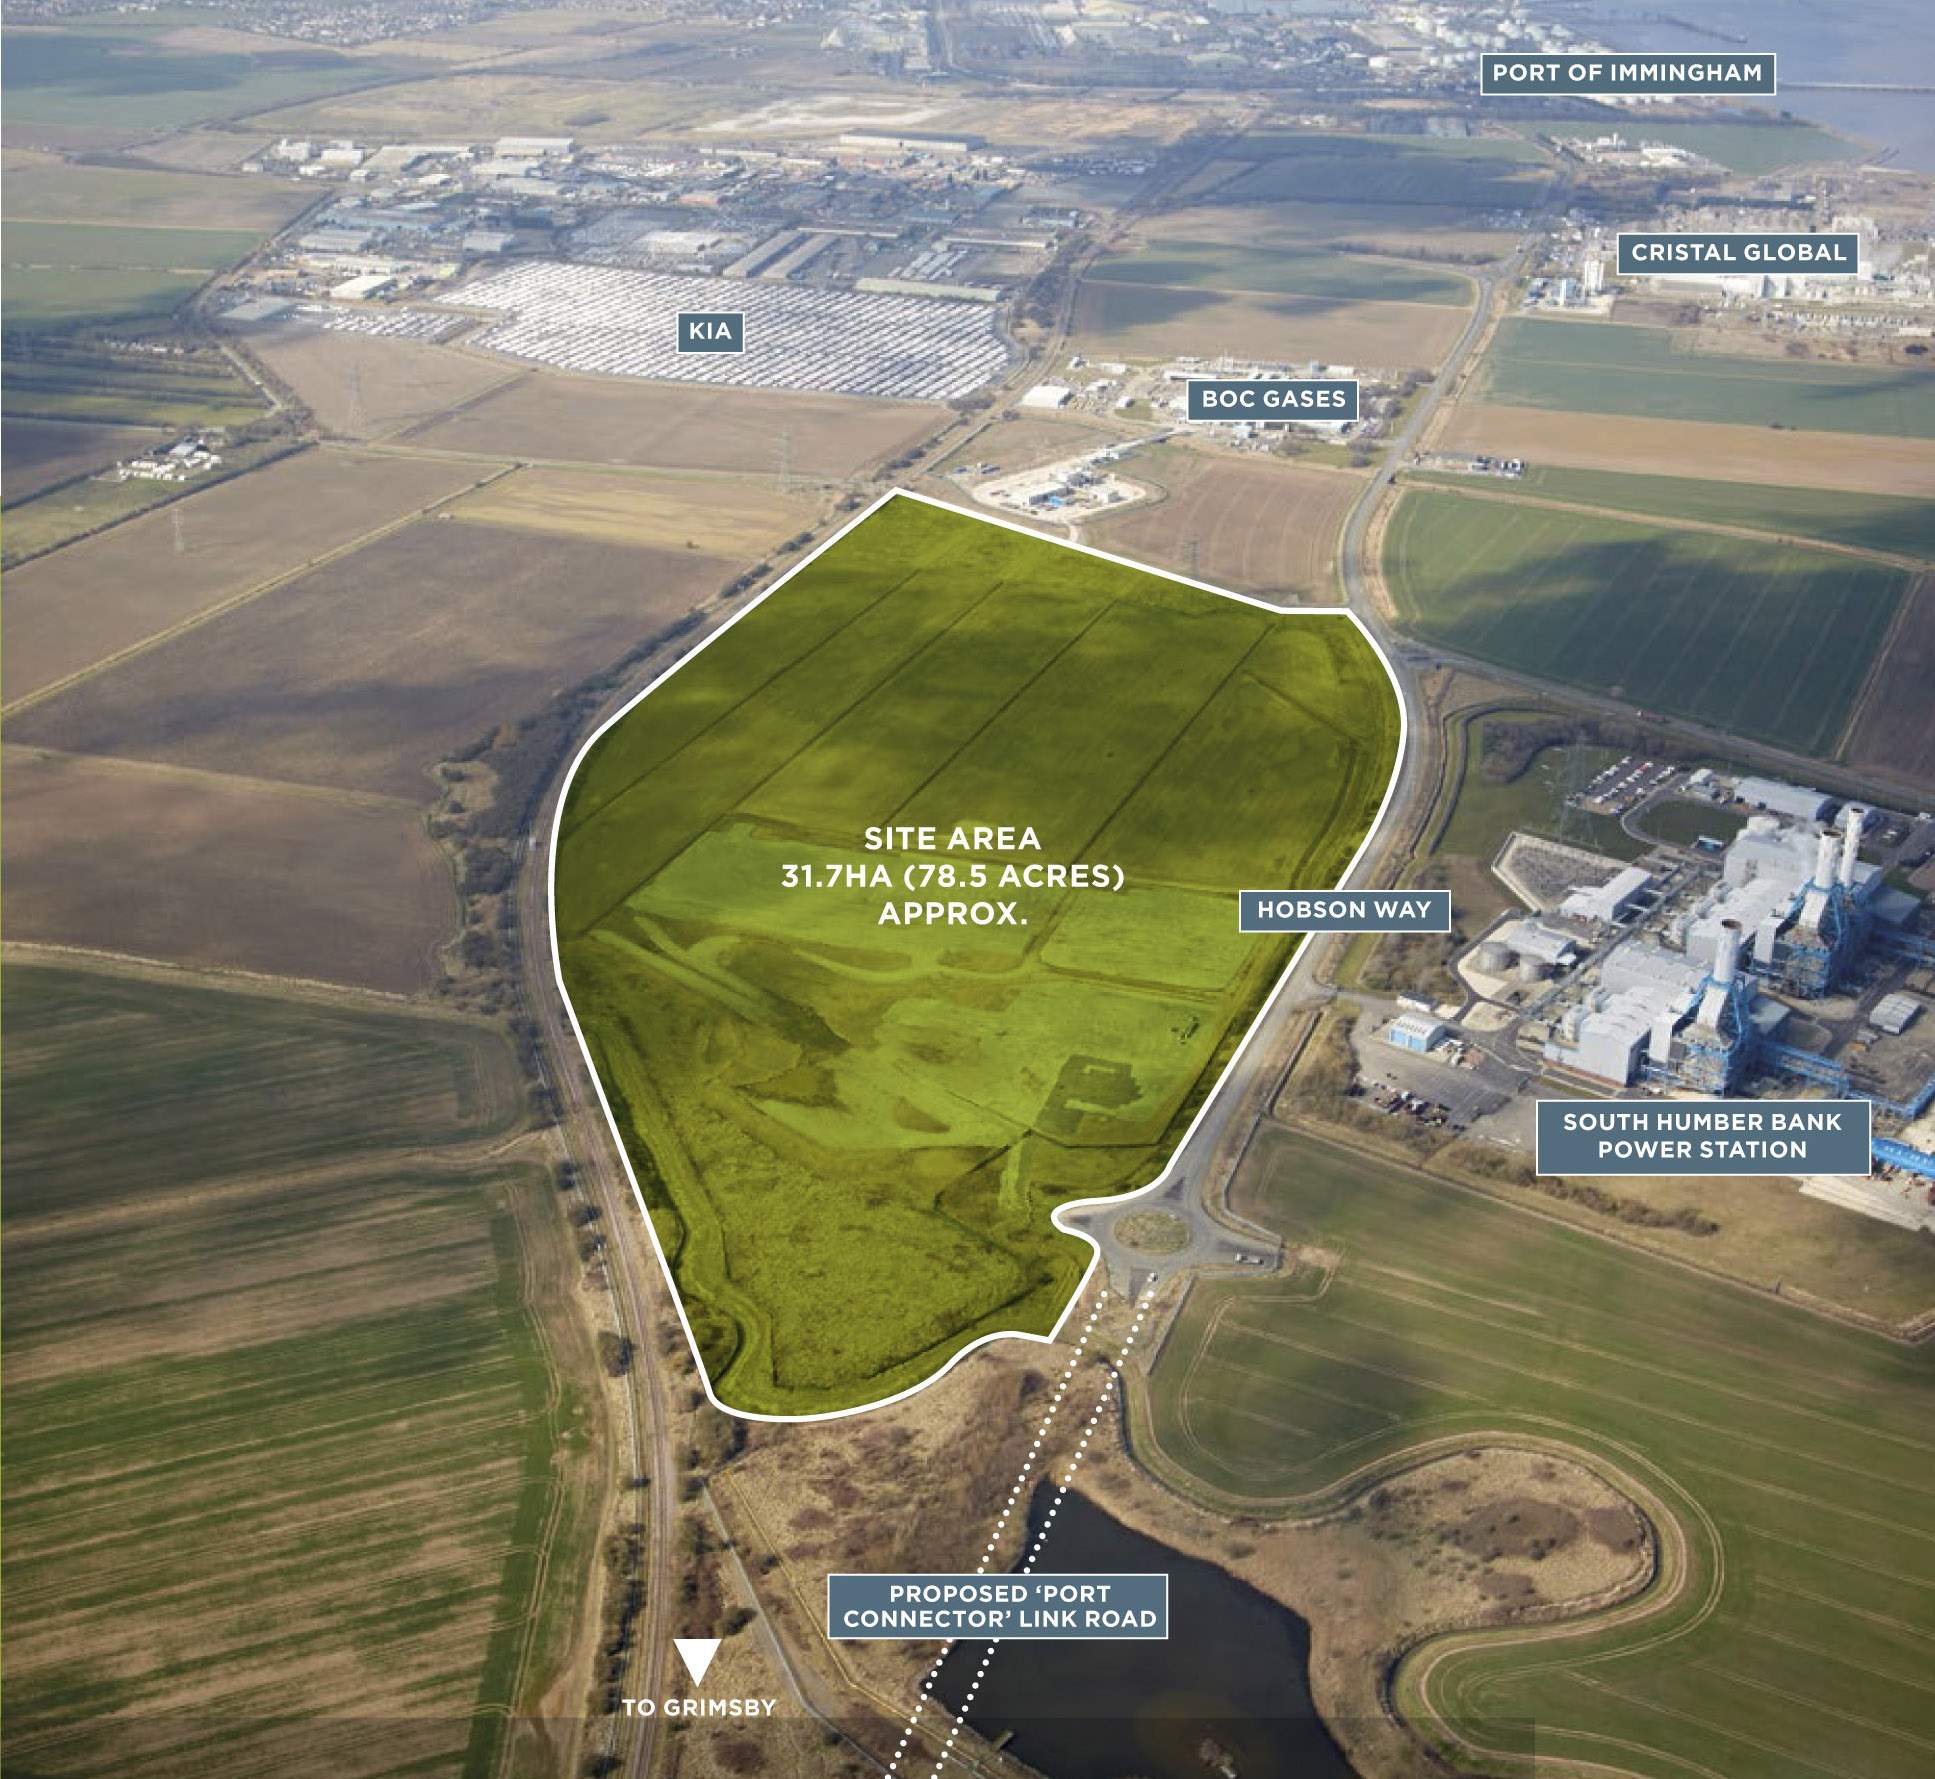 PORTLINK 180: 78.5 ACRE INDUSTRIAL DEVELOPMENT SITE CAN ACCOMMODATE 2,000 EMPLOYEES